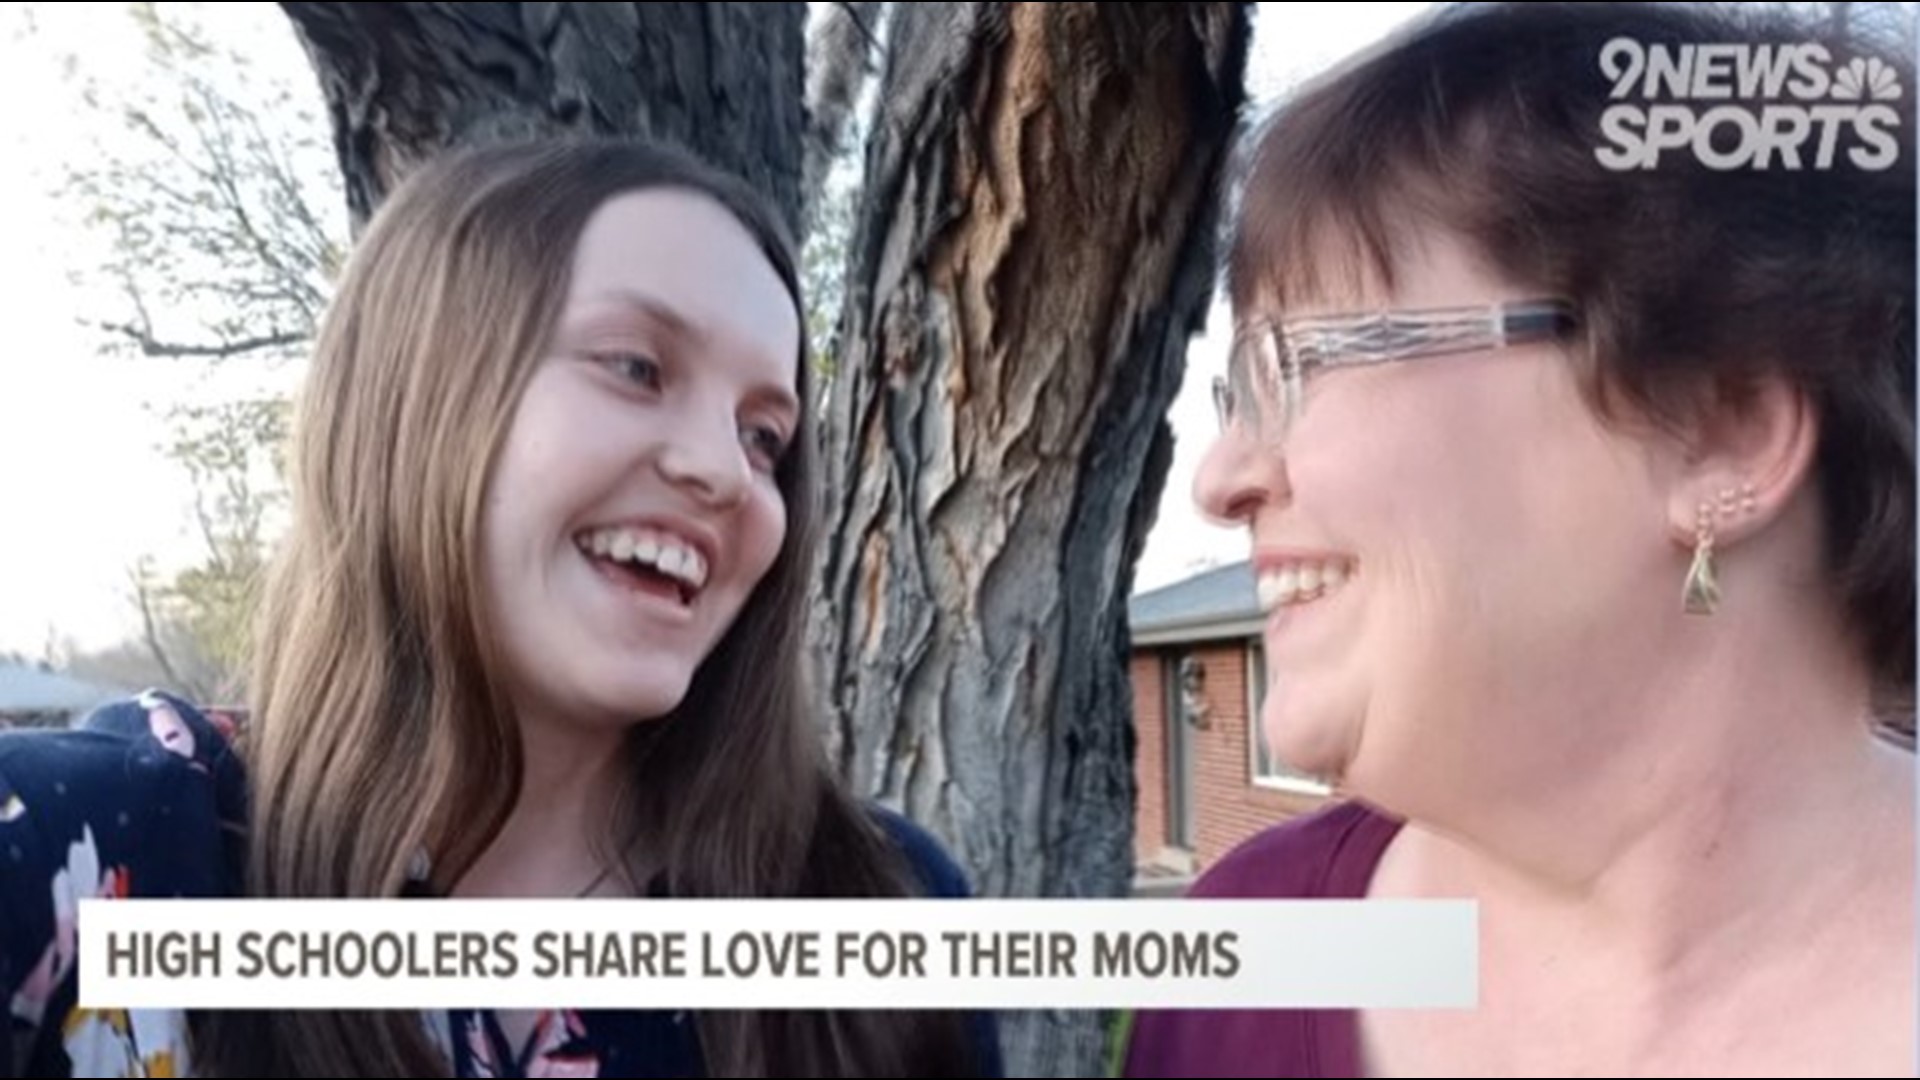 Student-athletes from across Colorado submitted messages praising their moms on Mother's Day.